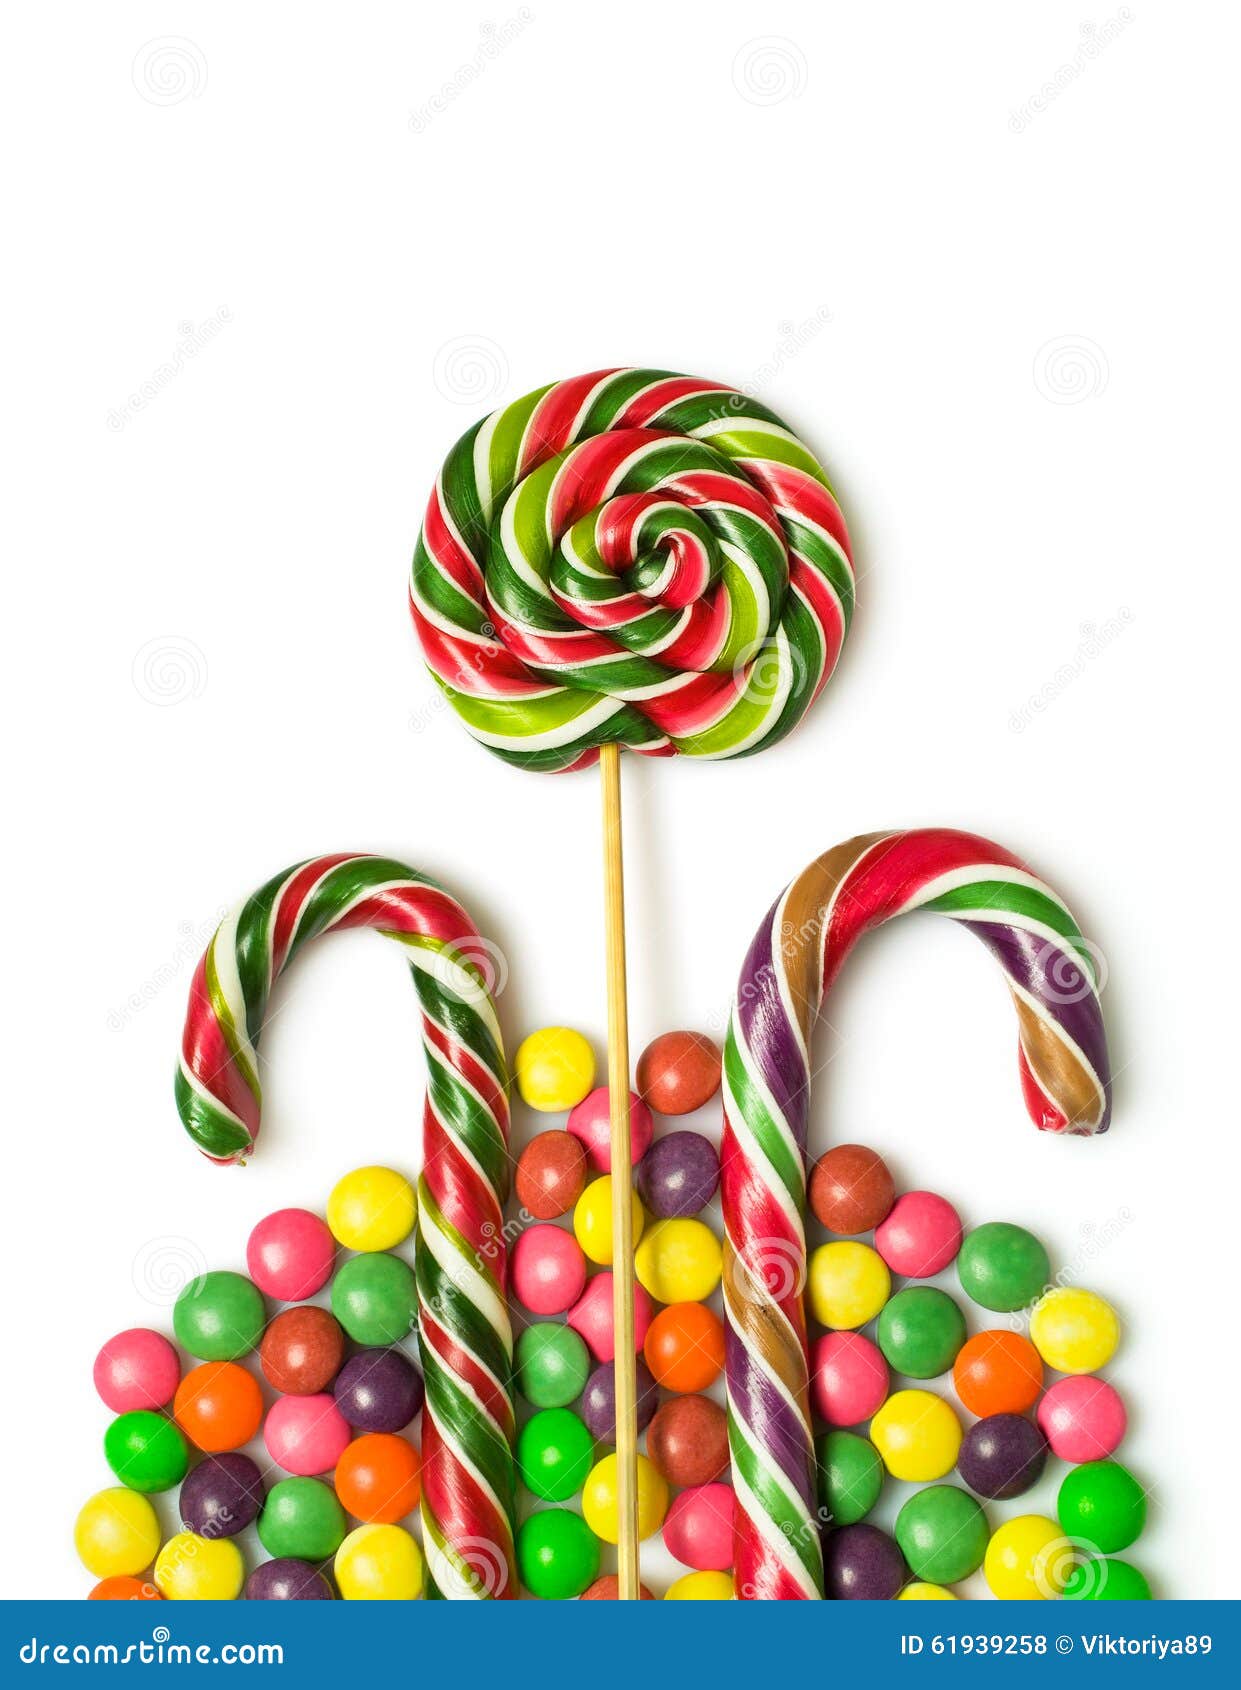 Colorful christmas candy stock photo. Image of bright - 61939258